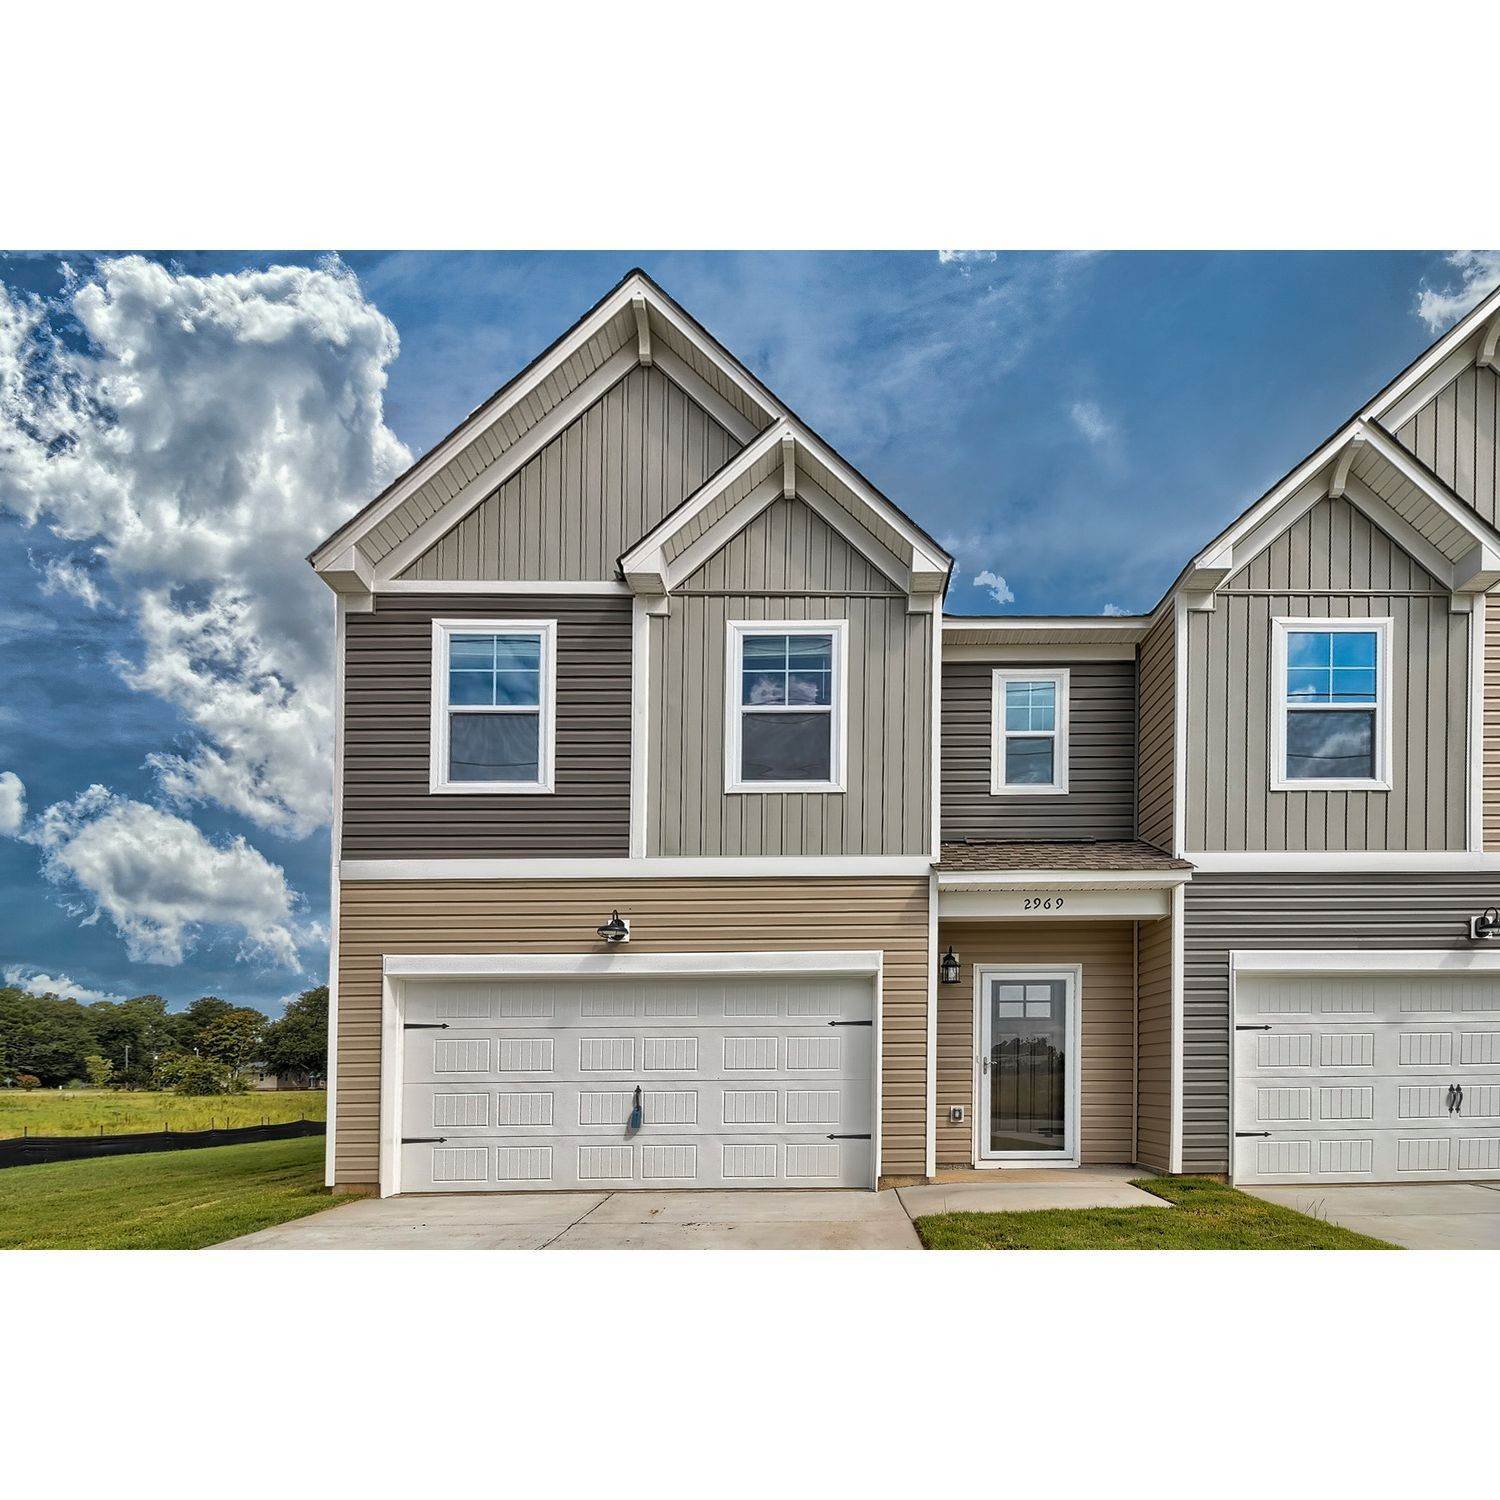 Townhomes at Pocalla Springs Gebäude bei 1788 Snead Drive, Sumter, SC 29154